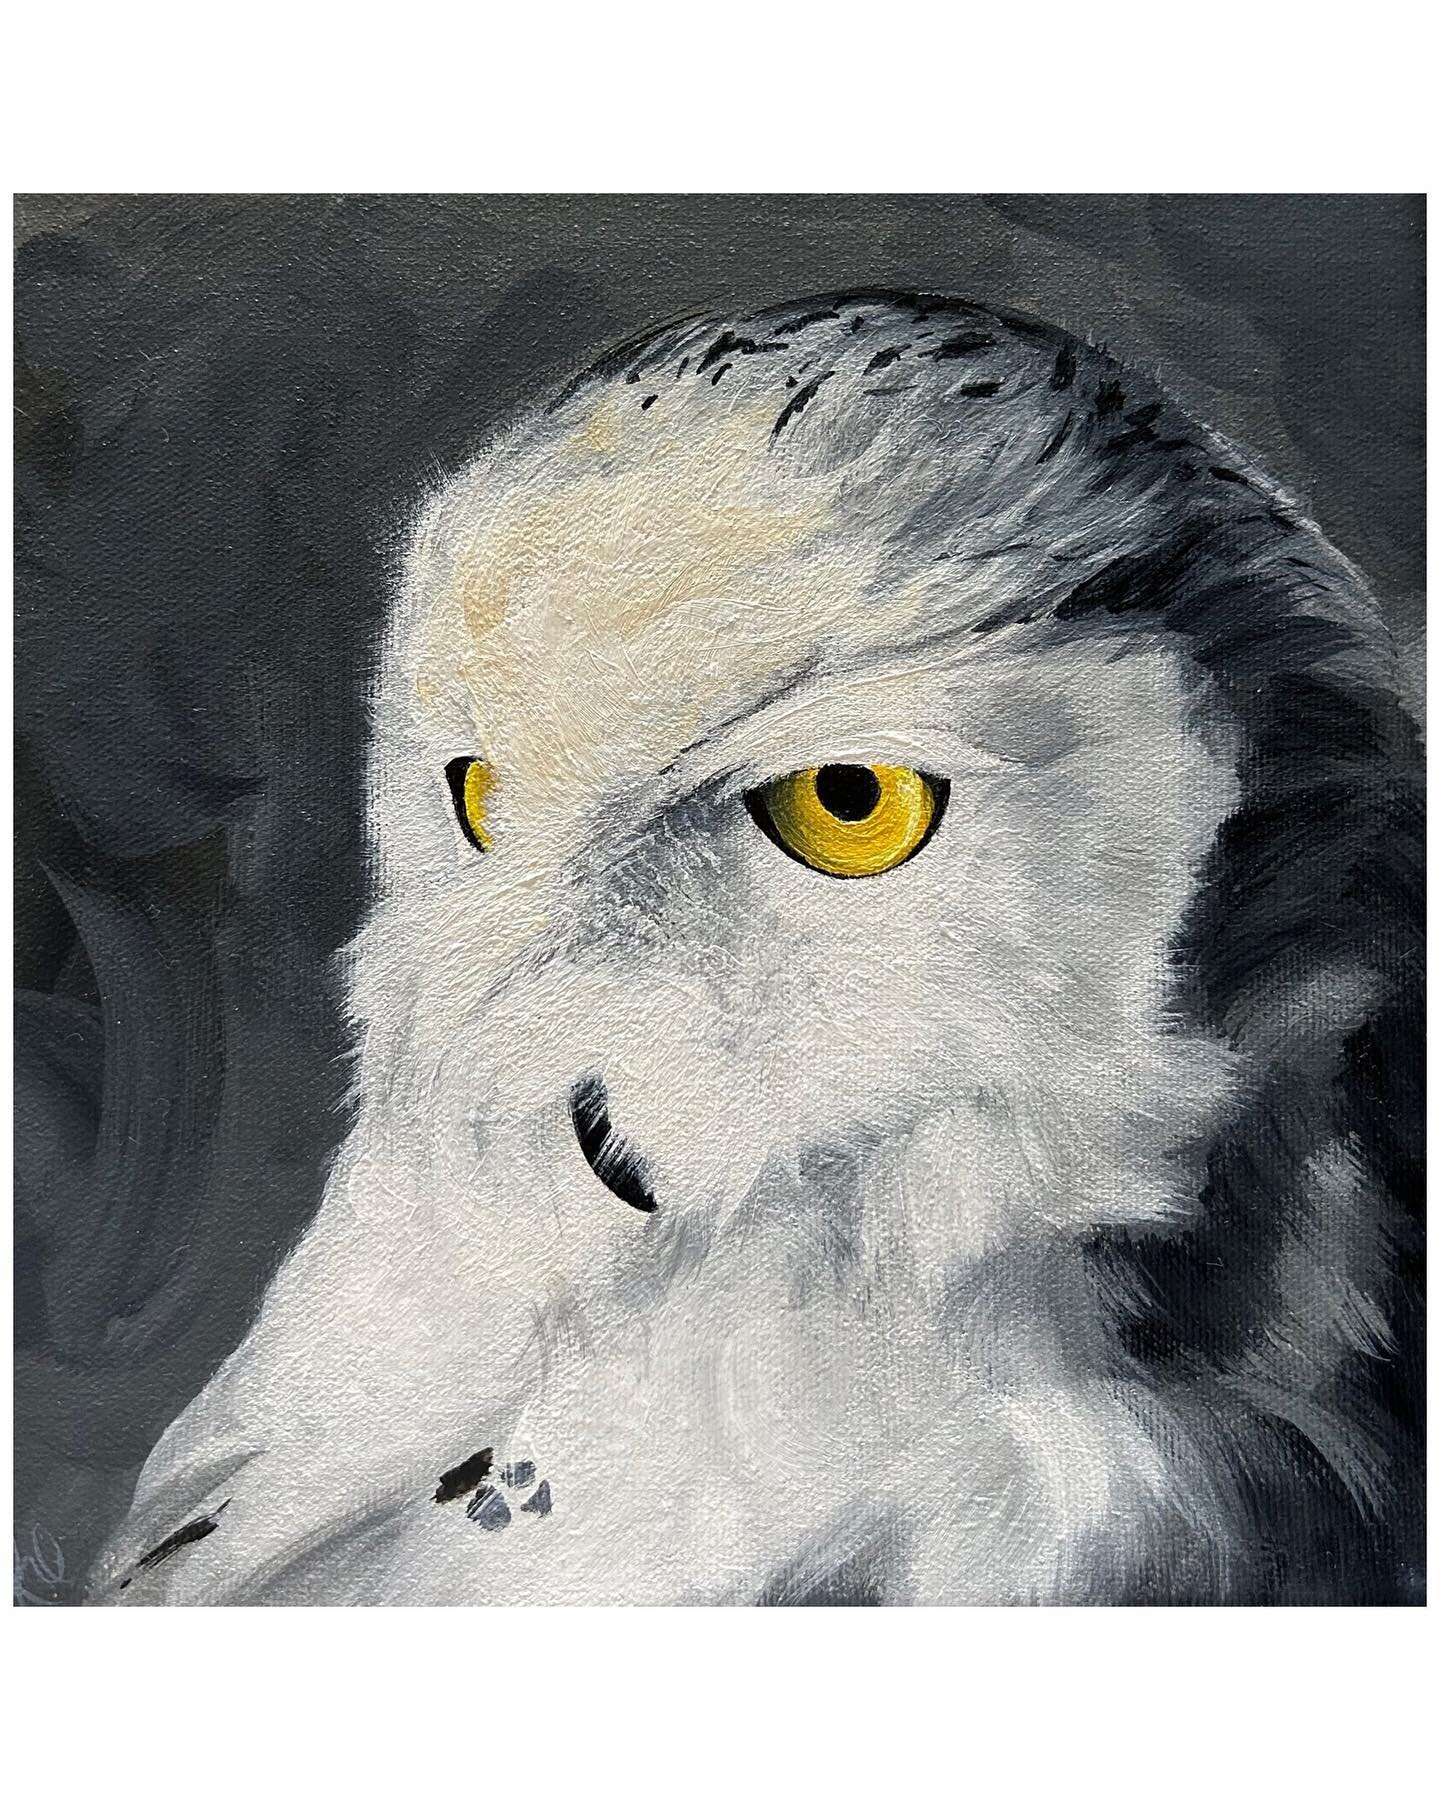 A very special commission as a gift for an executive&rsquo;s retirement. ❄️

&ldquo;Le vol du nord&rdquo;
8&rdquo; x 8&rdquo;
Acrylic on canvas

L&rsquo;hargang des neiges, the snowy owl, was adopted as Qu&eacute;bec&rsquo;s official bird in 1987. It